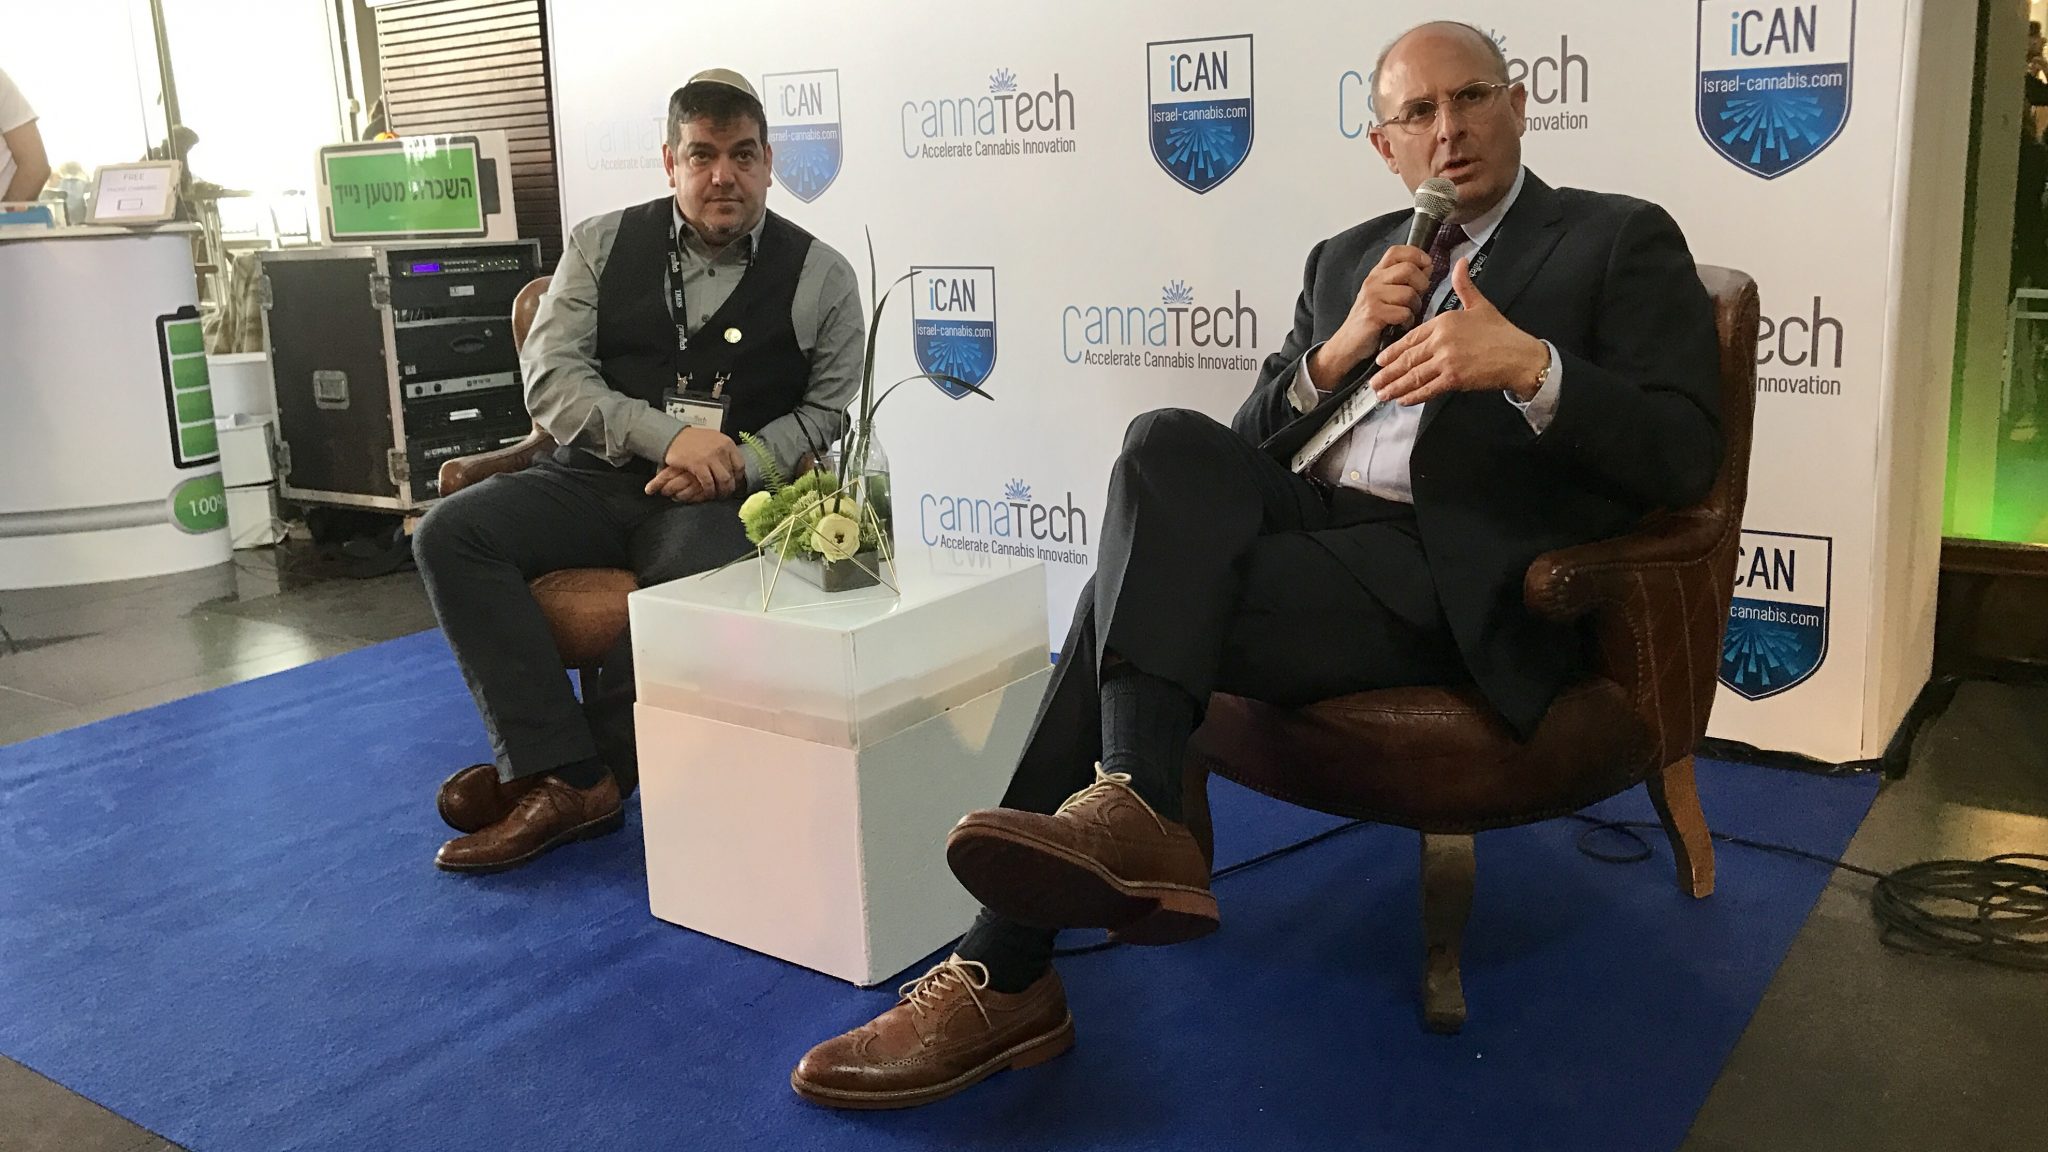 Saul Kaye, co-founder of iCAN Israel-Cannabis, and Bill Levine, executive chairman of CannRx Technologies, told a press conference at today's CannaTech event in Tel Aviv that a new sleep therapy based on cannabis is heading to market. Photo by Viva Sarah Press